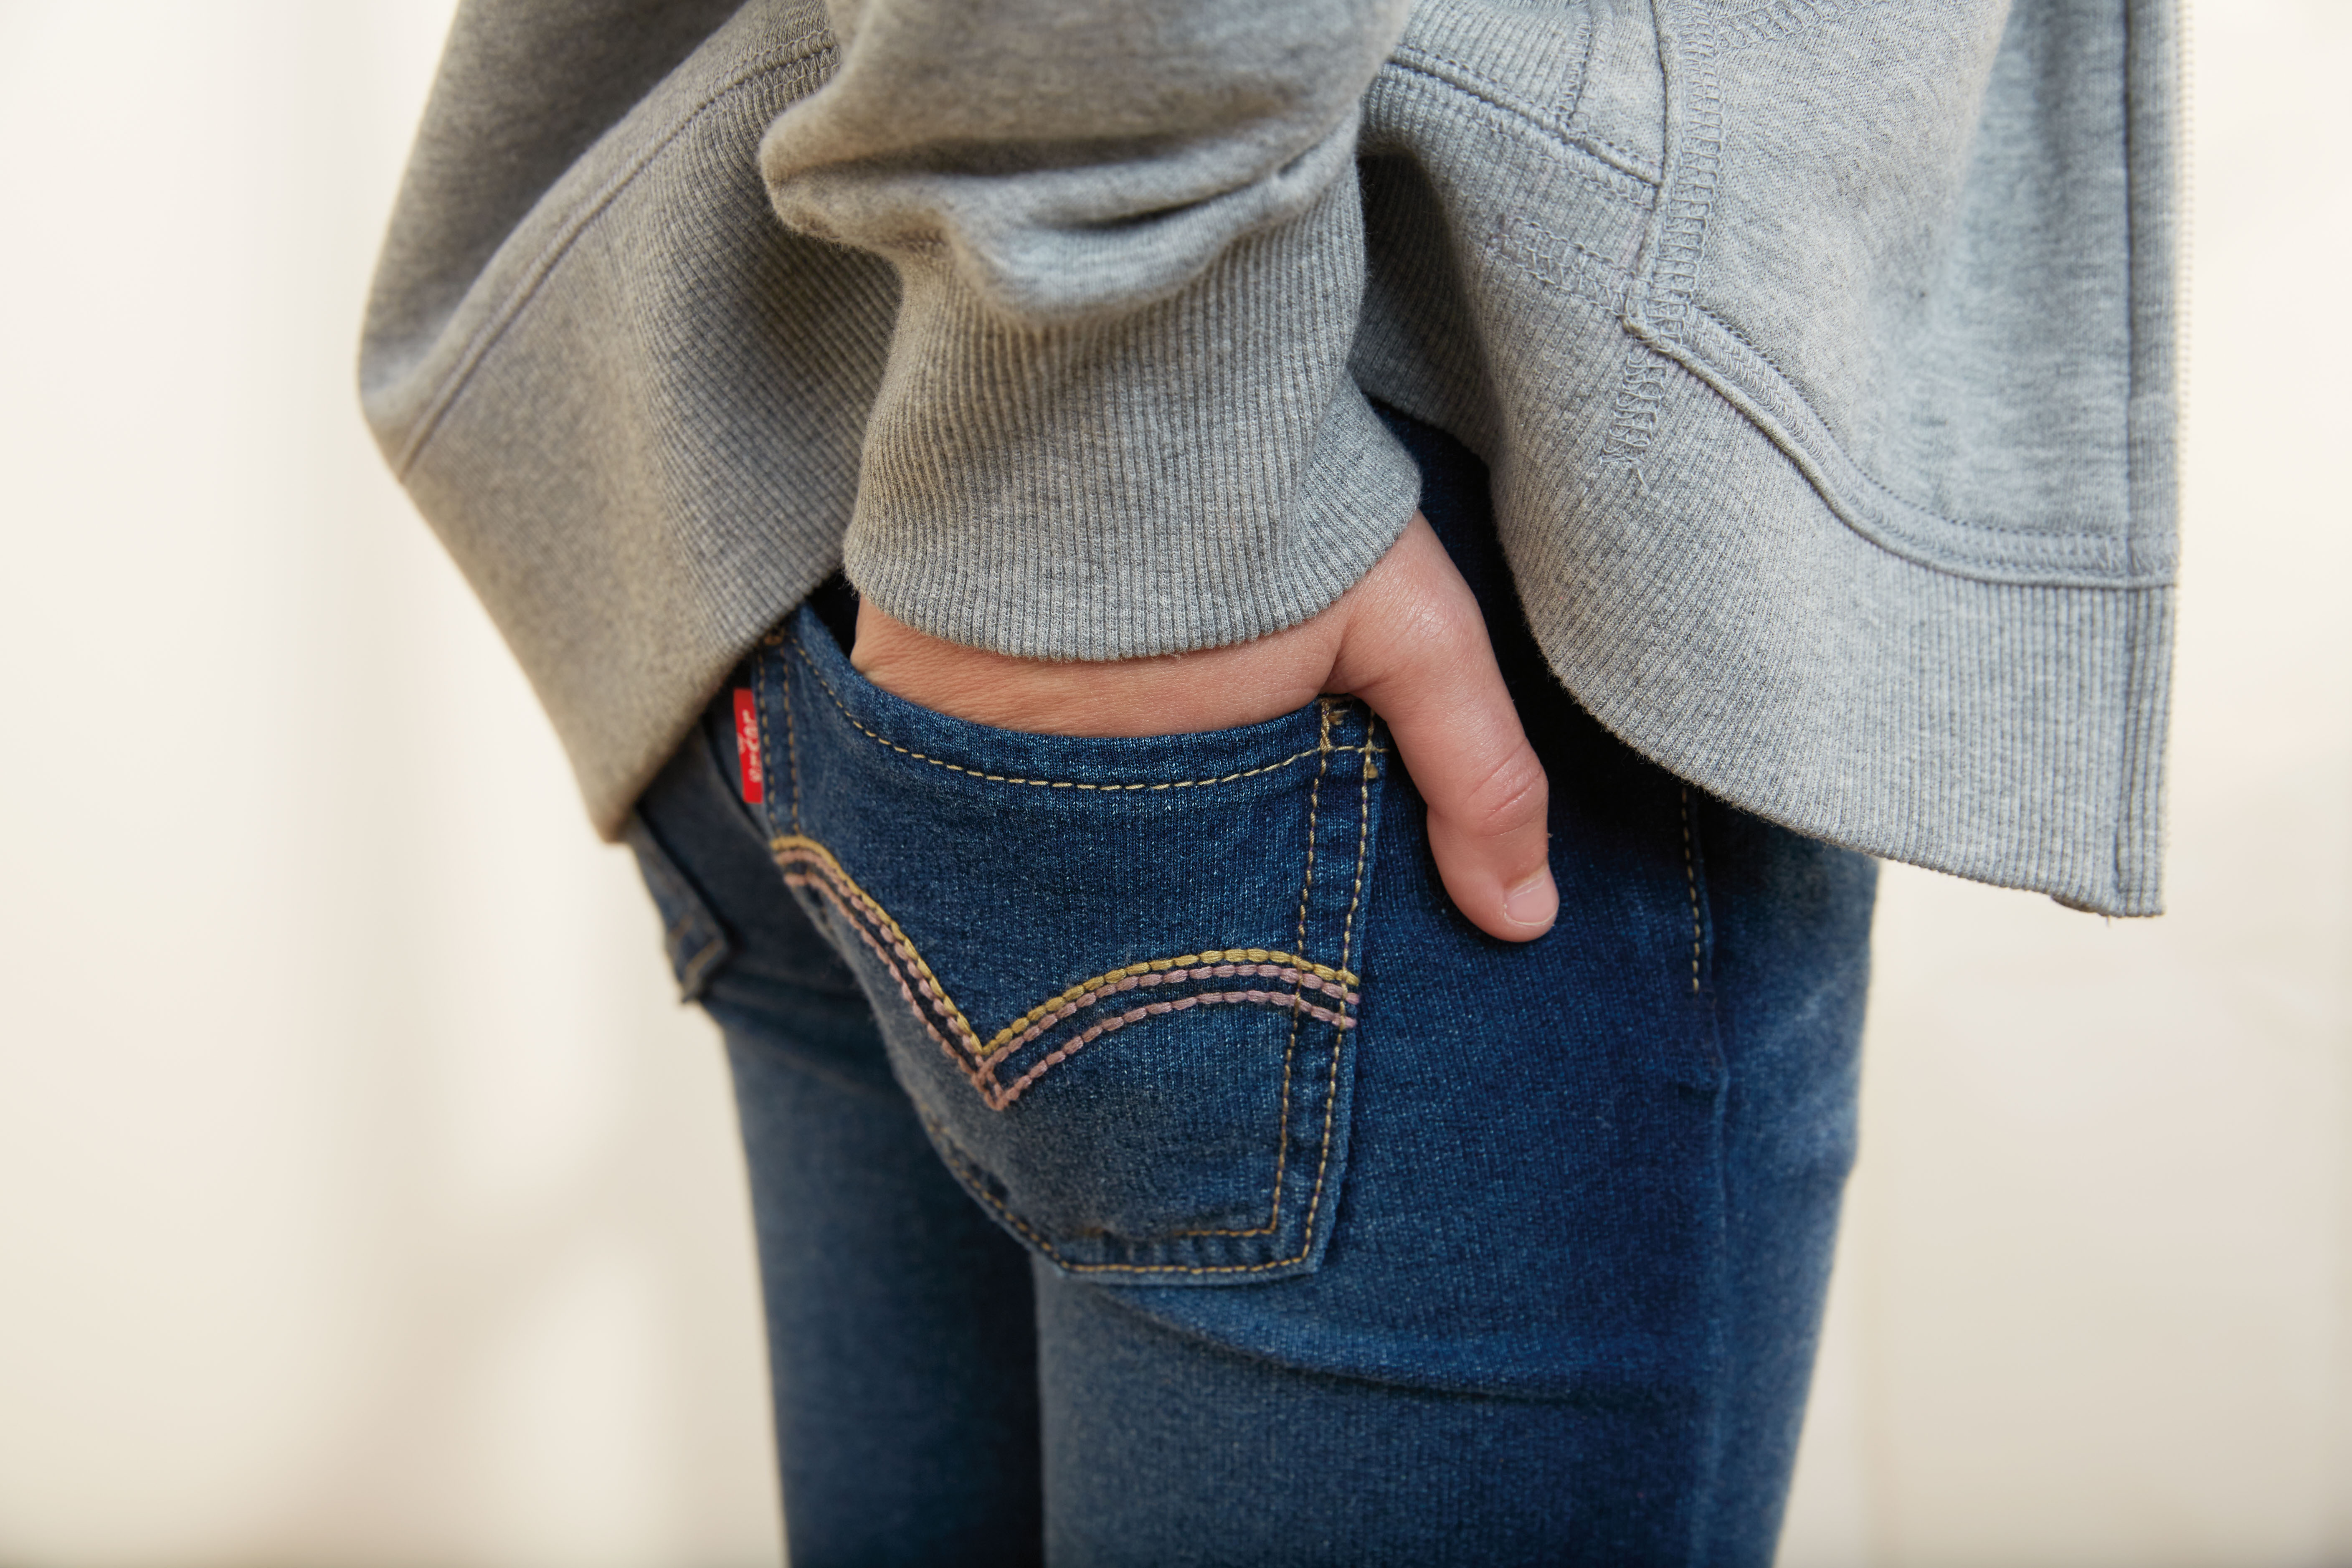 Why did Levi Strauss invent blue jeans?